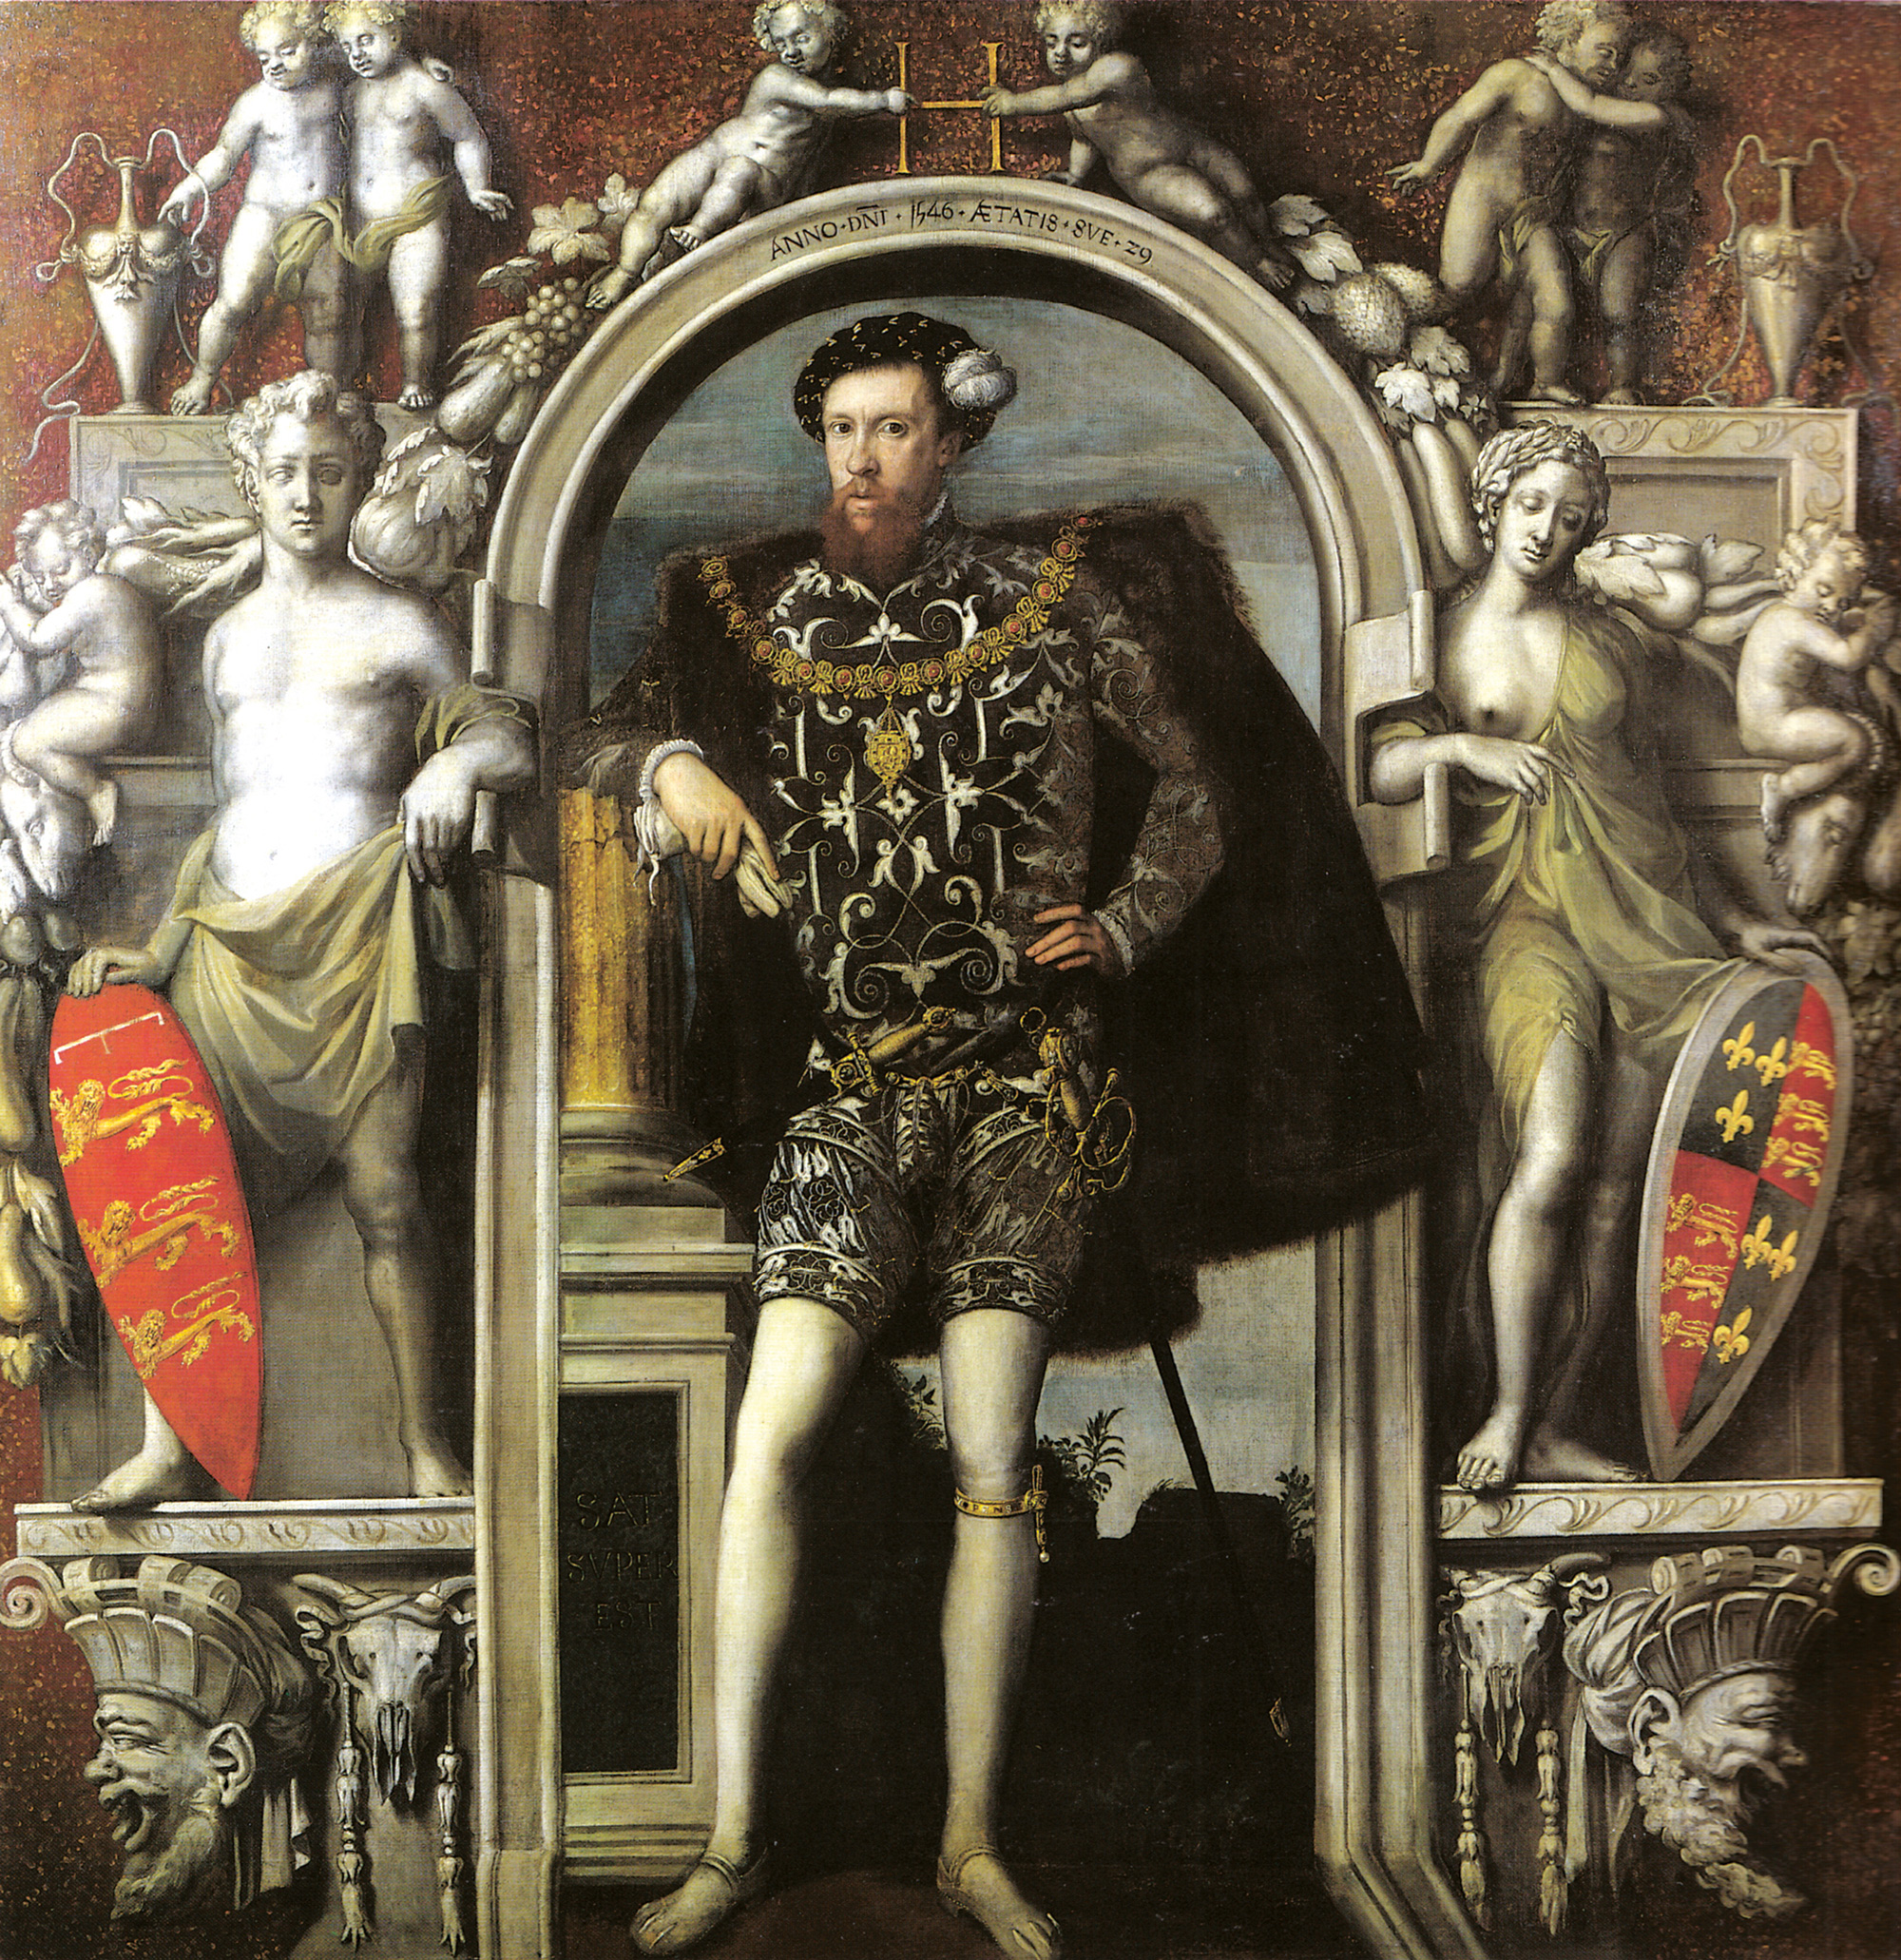 A portrait of Henry Howard, the Earl of Surrey, the most painted man at court after Henry the eighth himself, attributed to the court painter William Scrots. Here Surrey is depicted leaning on a broken pillar under the arms of Thomas of Brotherton, son of Edward the first, and Thomas of Woodcock, son of Edward the third. His use of heraldry to locate himself in the royal lineage, perhaps maneuvering to be Protector to the king’s heir, was the principal charge against him when he was brought to trial for treason and executed in fifteen forty-seven. The date of the portrait is uncertain: perhaps made from life, at his commission; perhaps a memorial to his ambitions, when both he and the king who had killed him were dead.